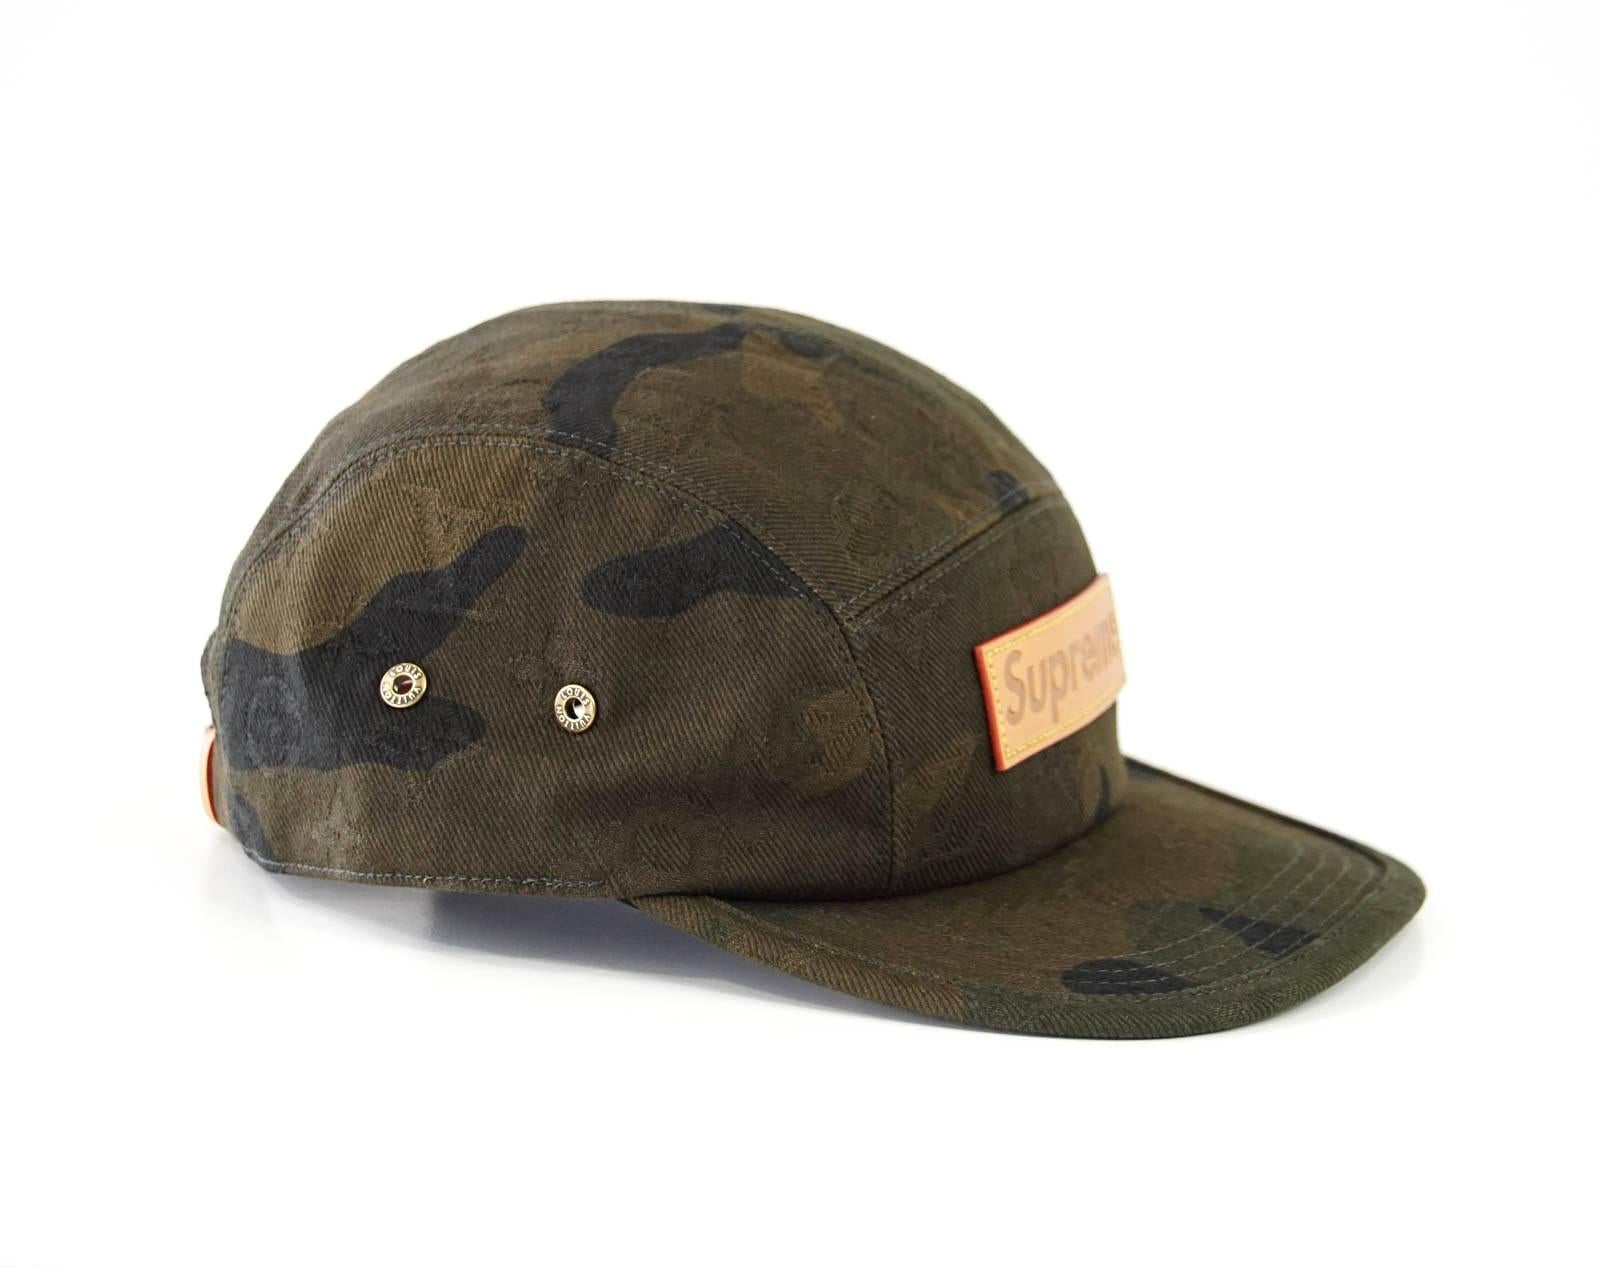 Guaranteed authentic highly coveted and sought after Louis Vuitton Supreme X  Limited Edition Green Camouflage 5 panel Cap.
Front Supreme leather plaque.
Adjustable rear leather strap with buckle.    
Comes with LV gift box.
NEW or NEVER WORN
      